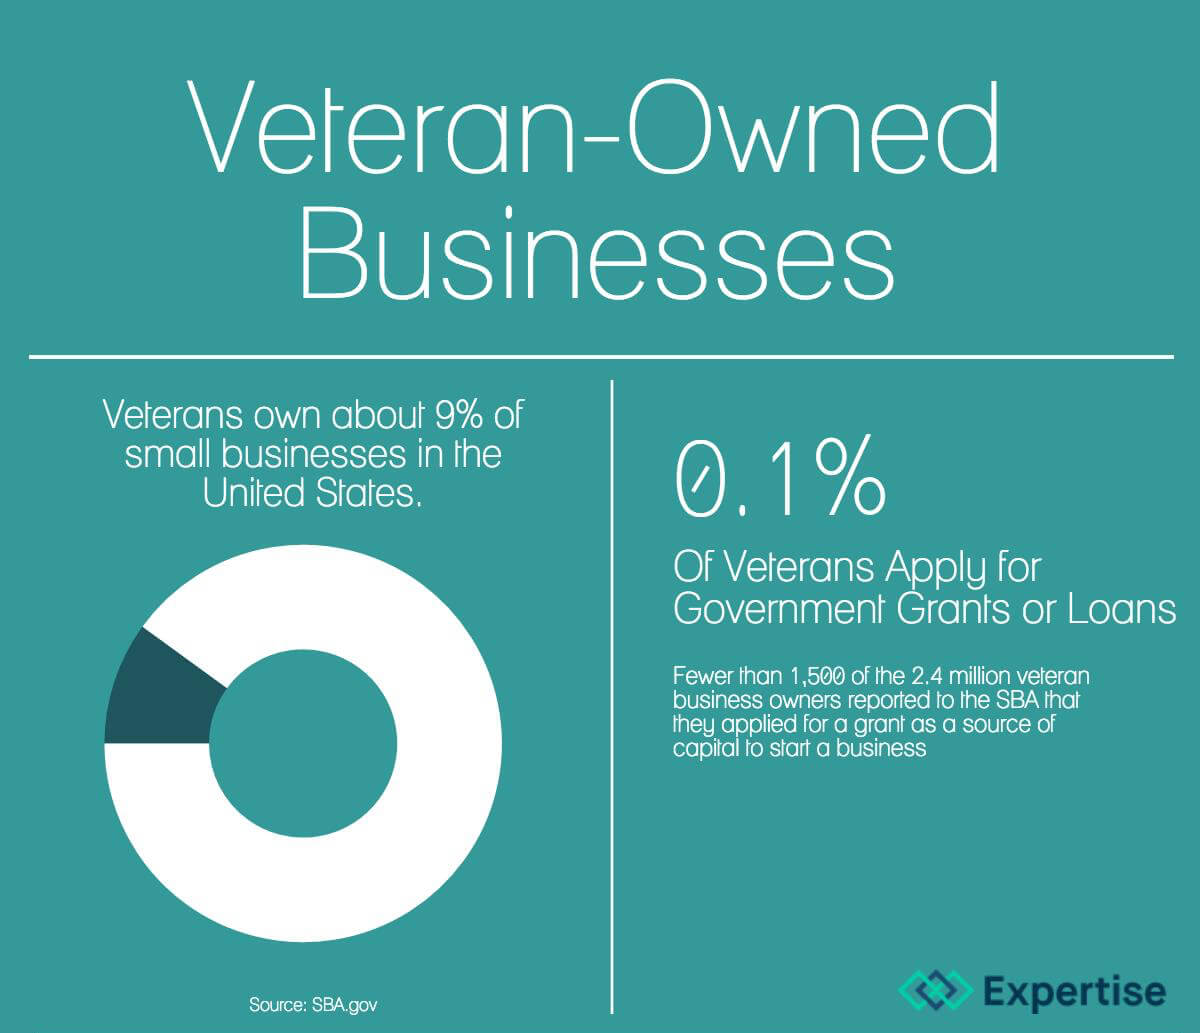 Veterans own 9% of SMBs, but only about .1% seek grants